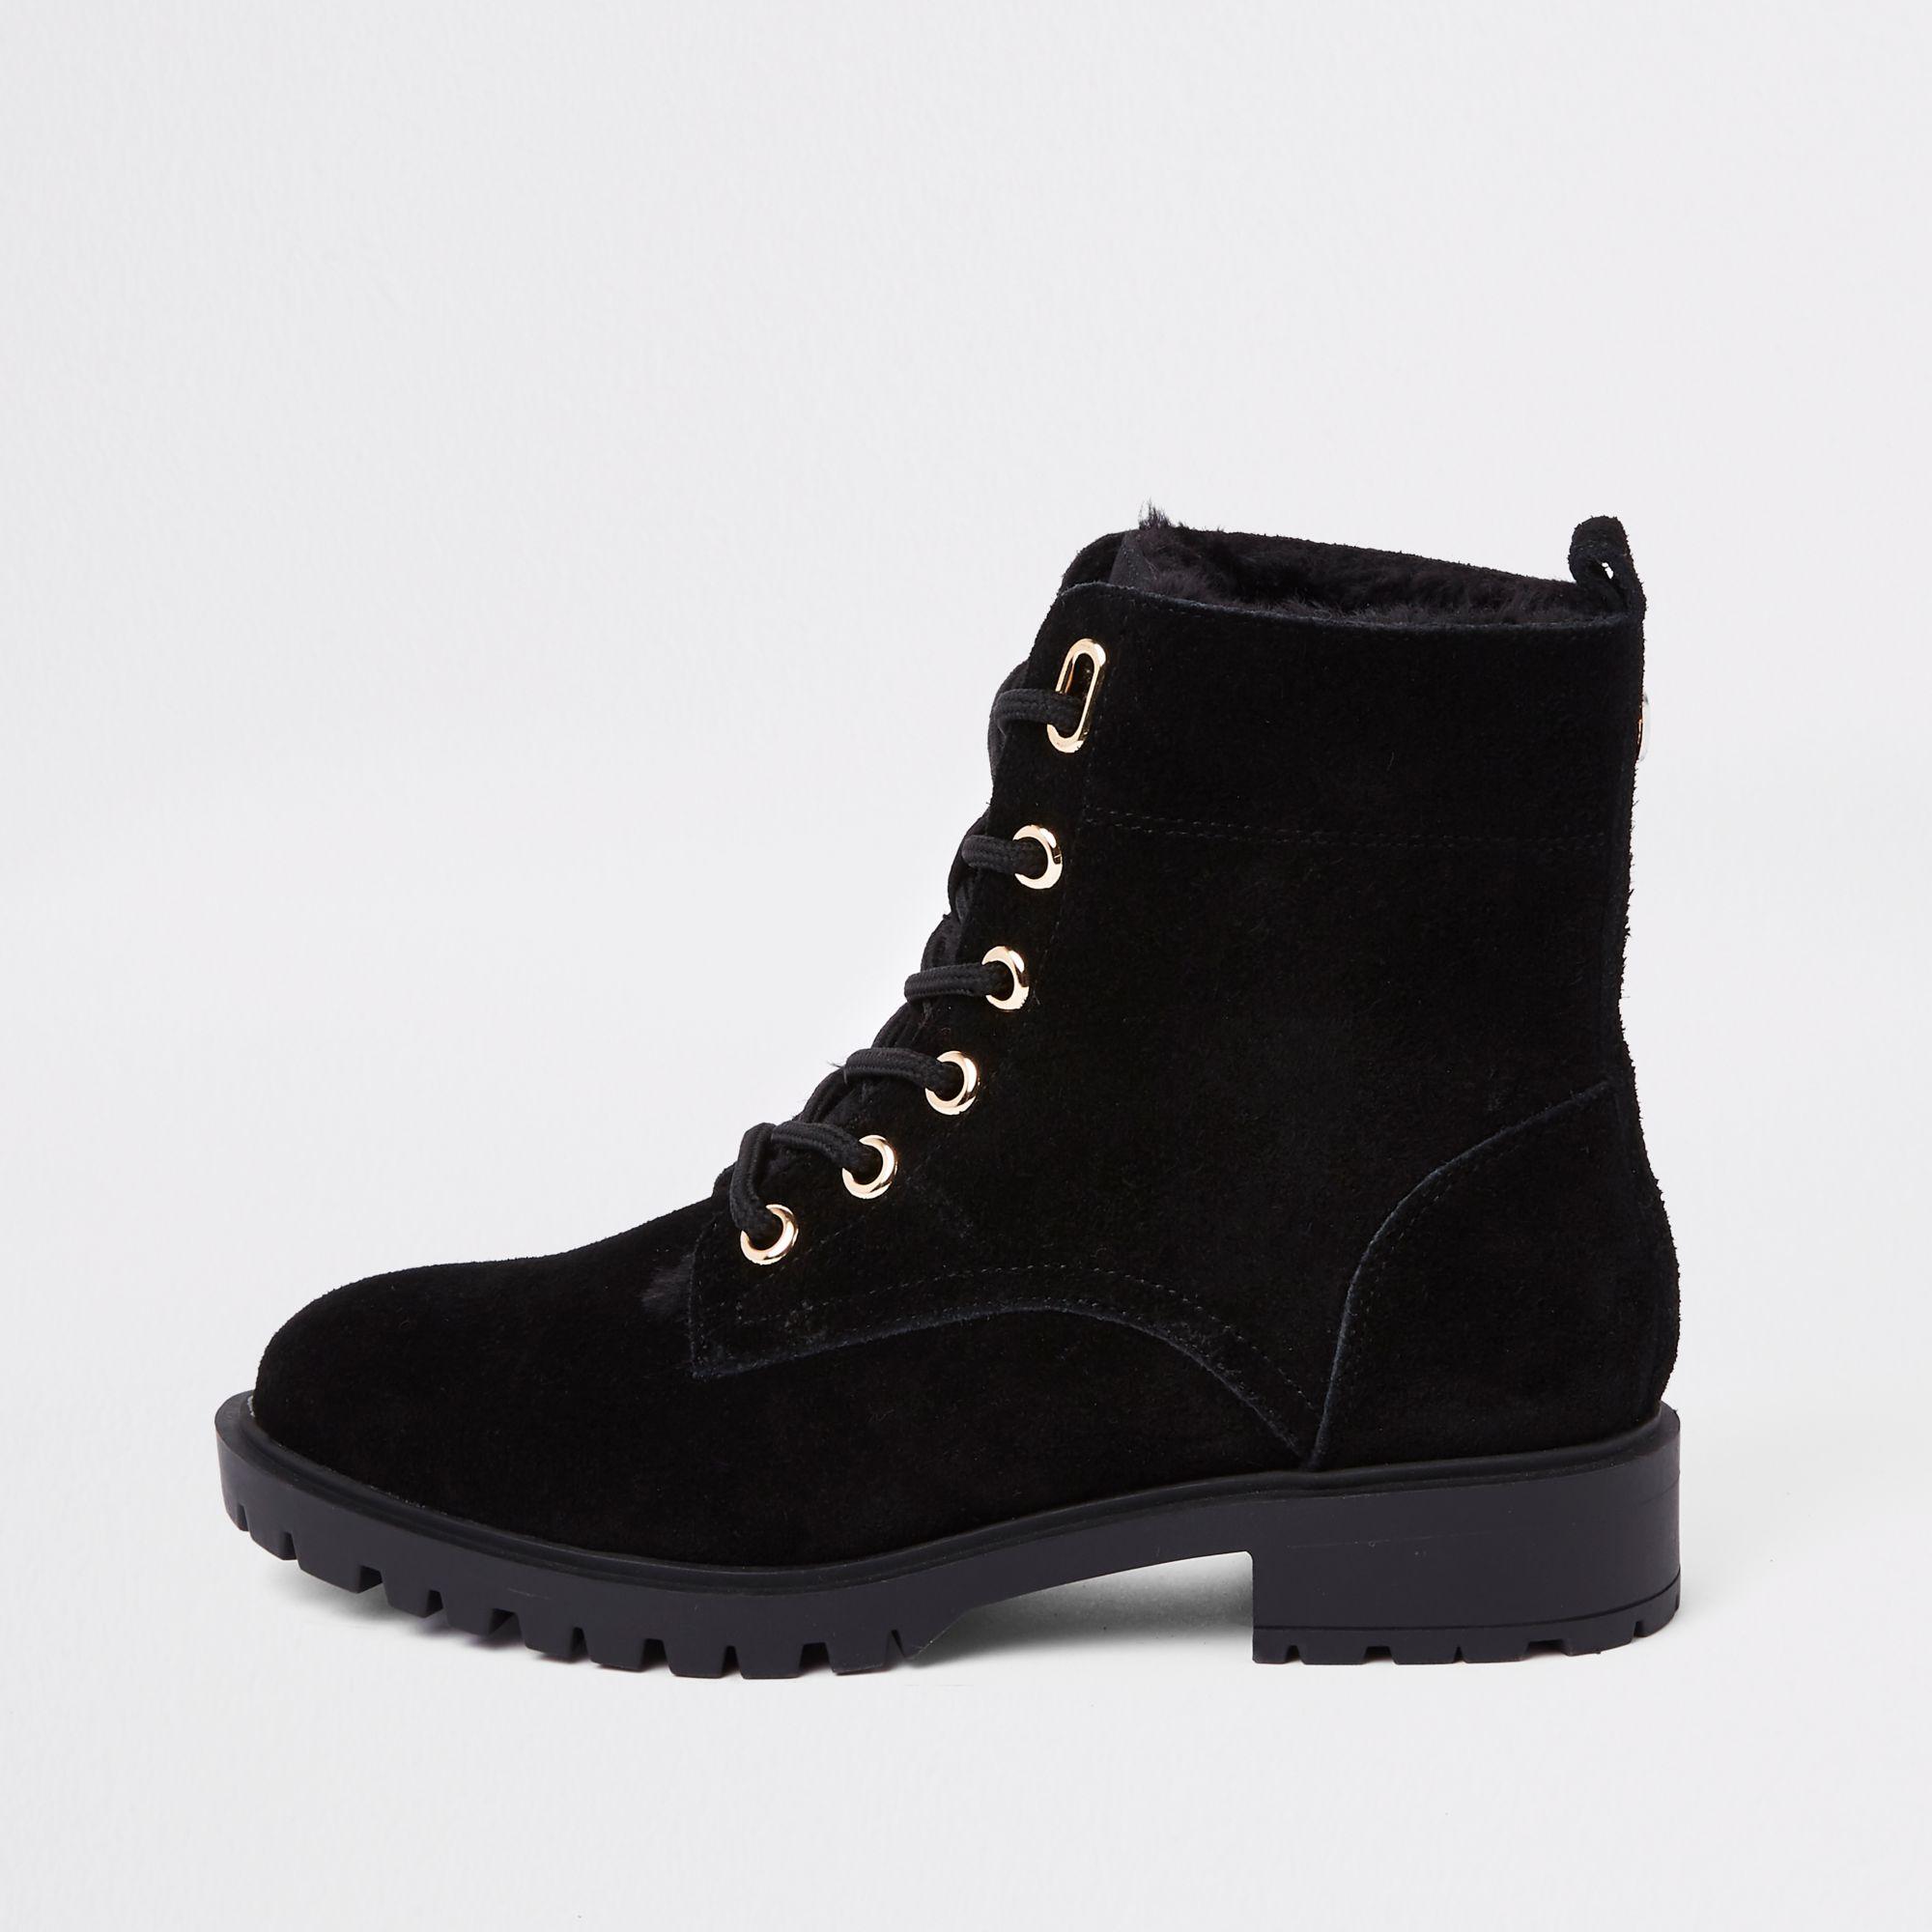 Lyst - River Island Faux Fur Lined Lace-up Hiking Boots in Black